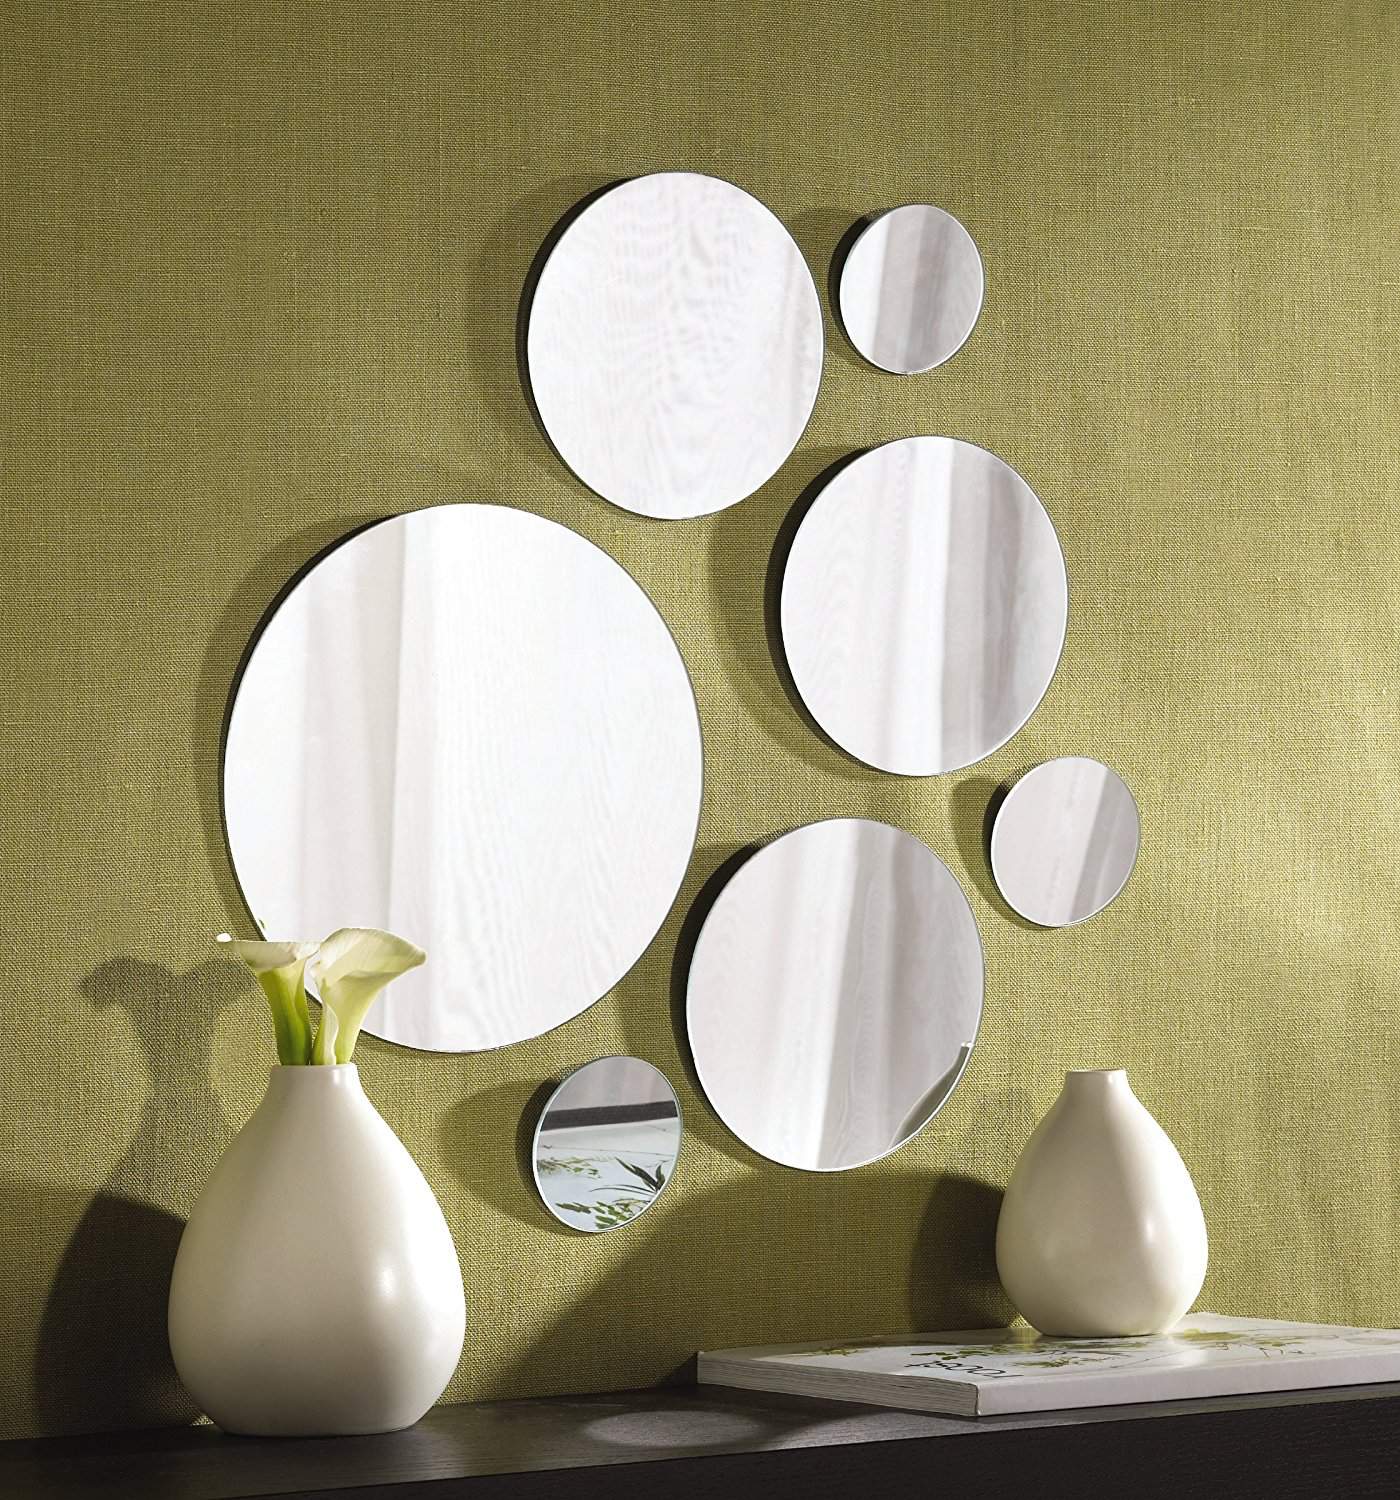 Decoration using Different Mirrors